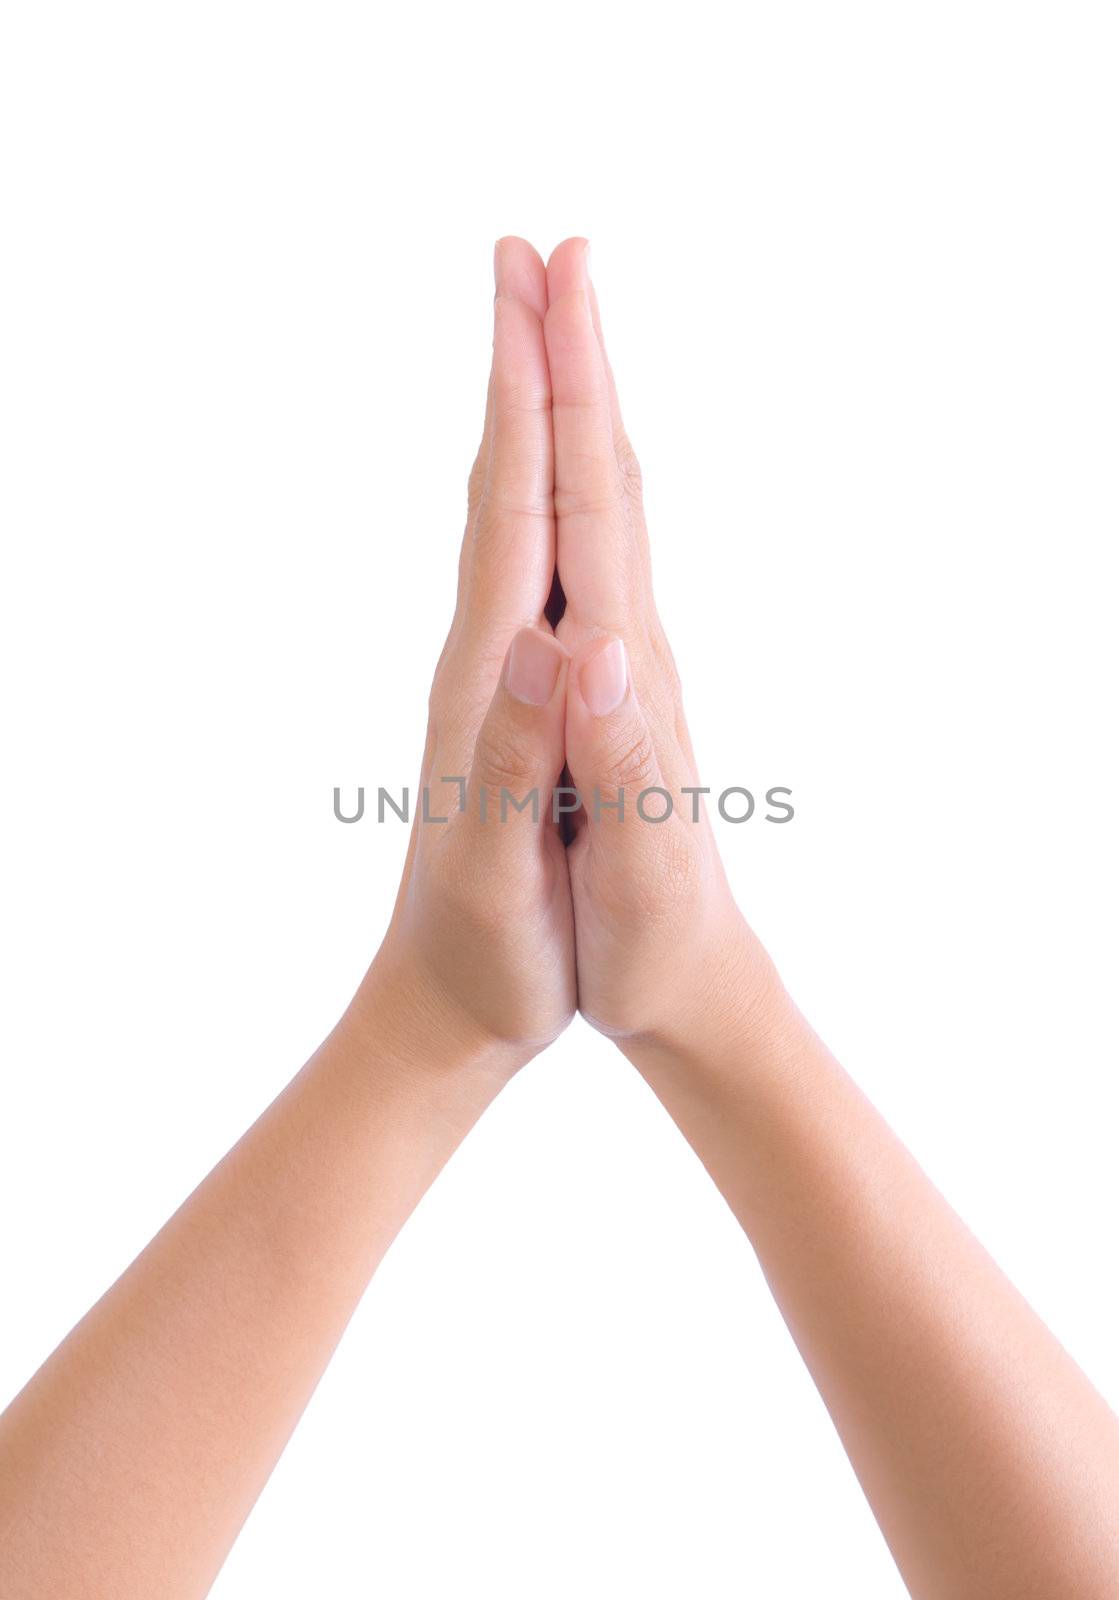 put hands together in salute by tungphoto